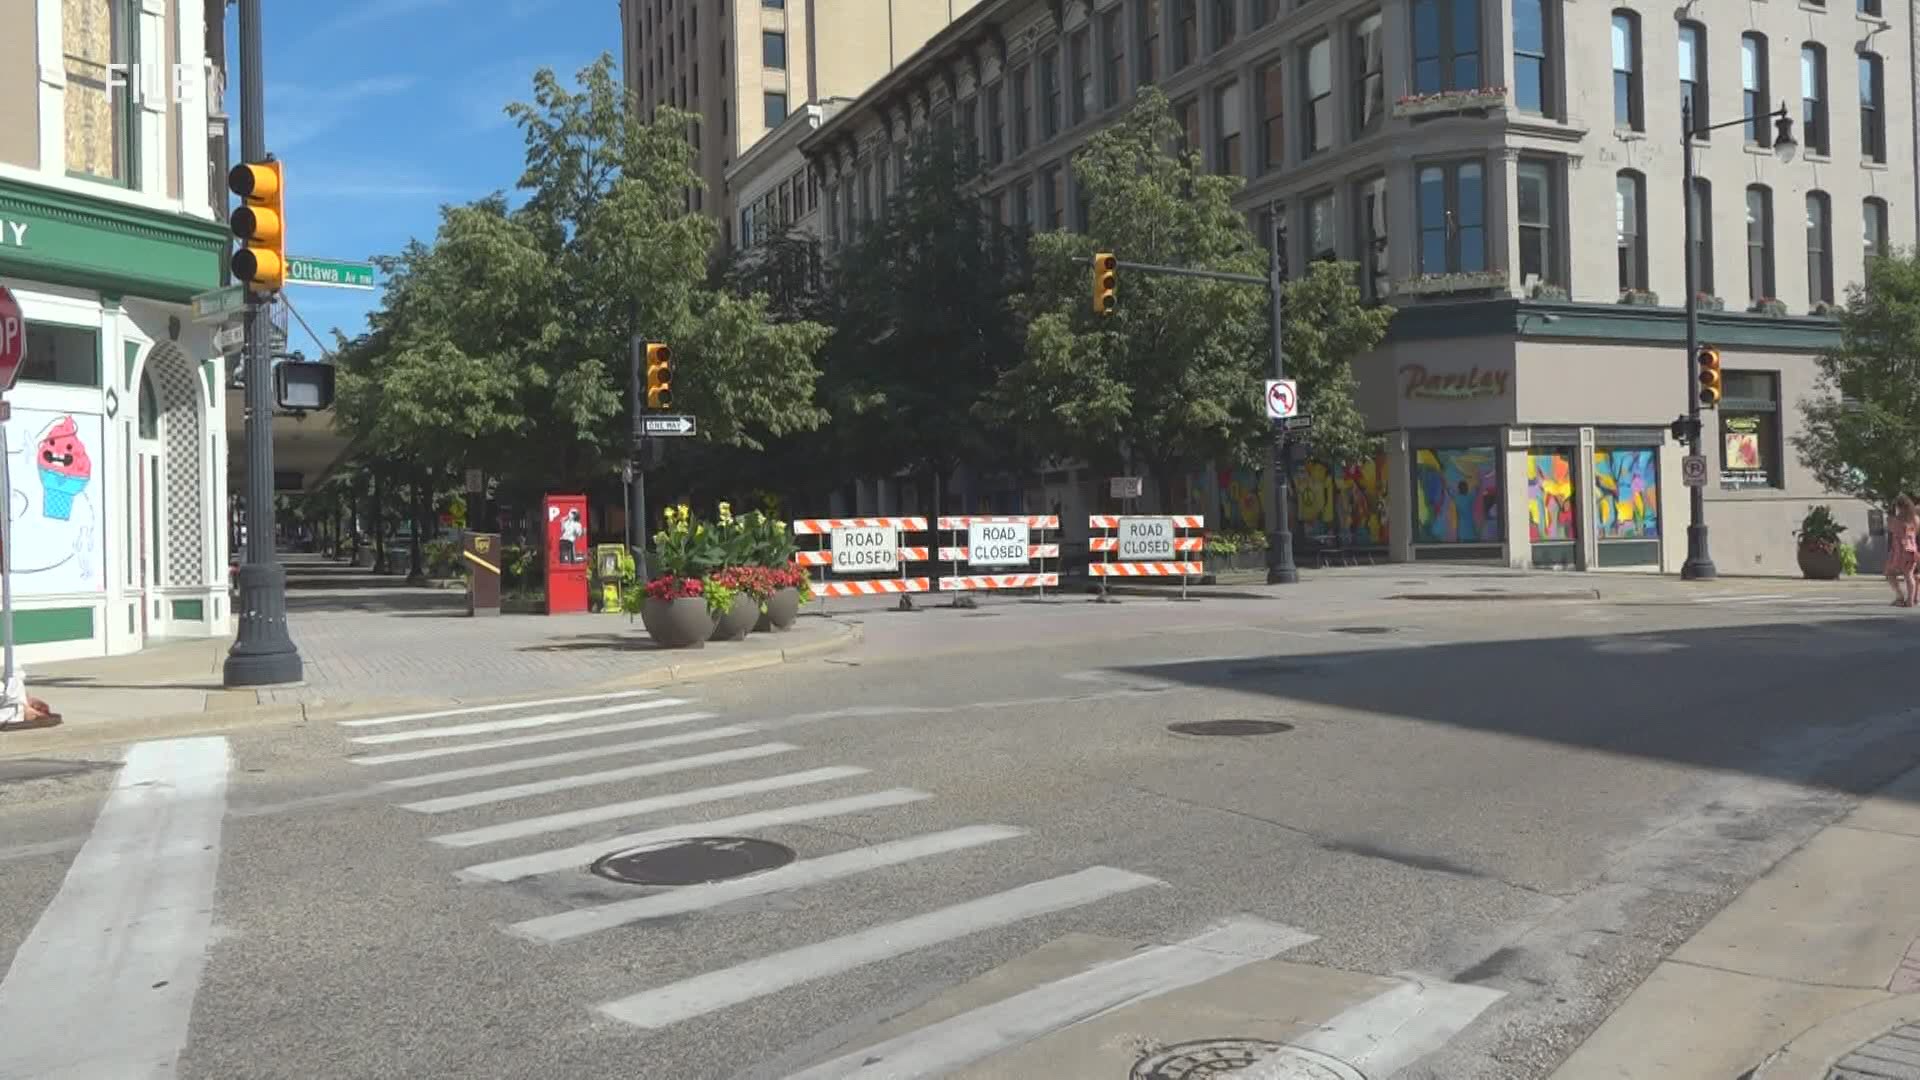 A public hearing was held Tuesday night to discuss designating a downtown Grand Rapids street  as 'Breonna Taylor Way.'